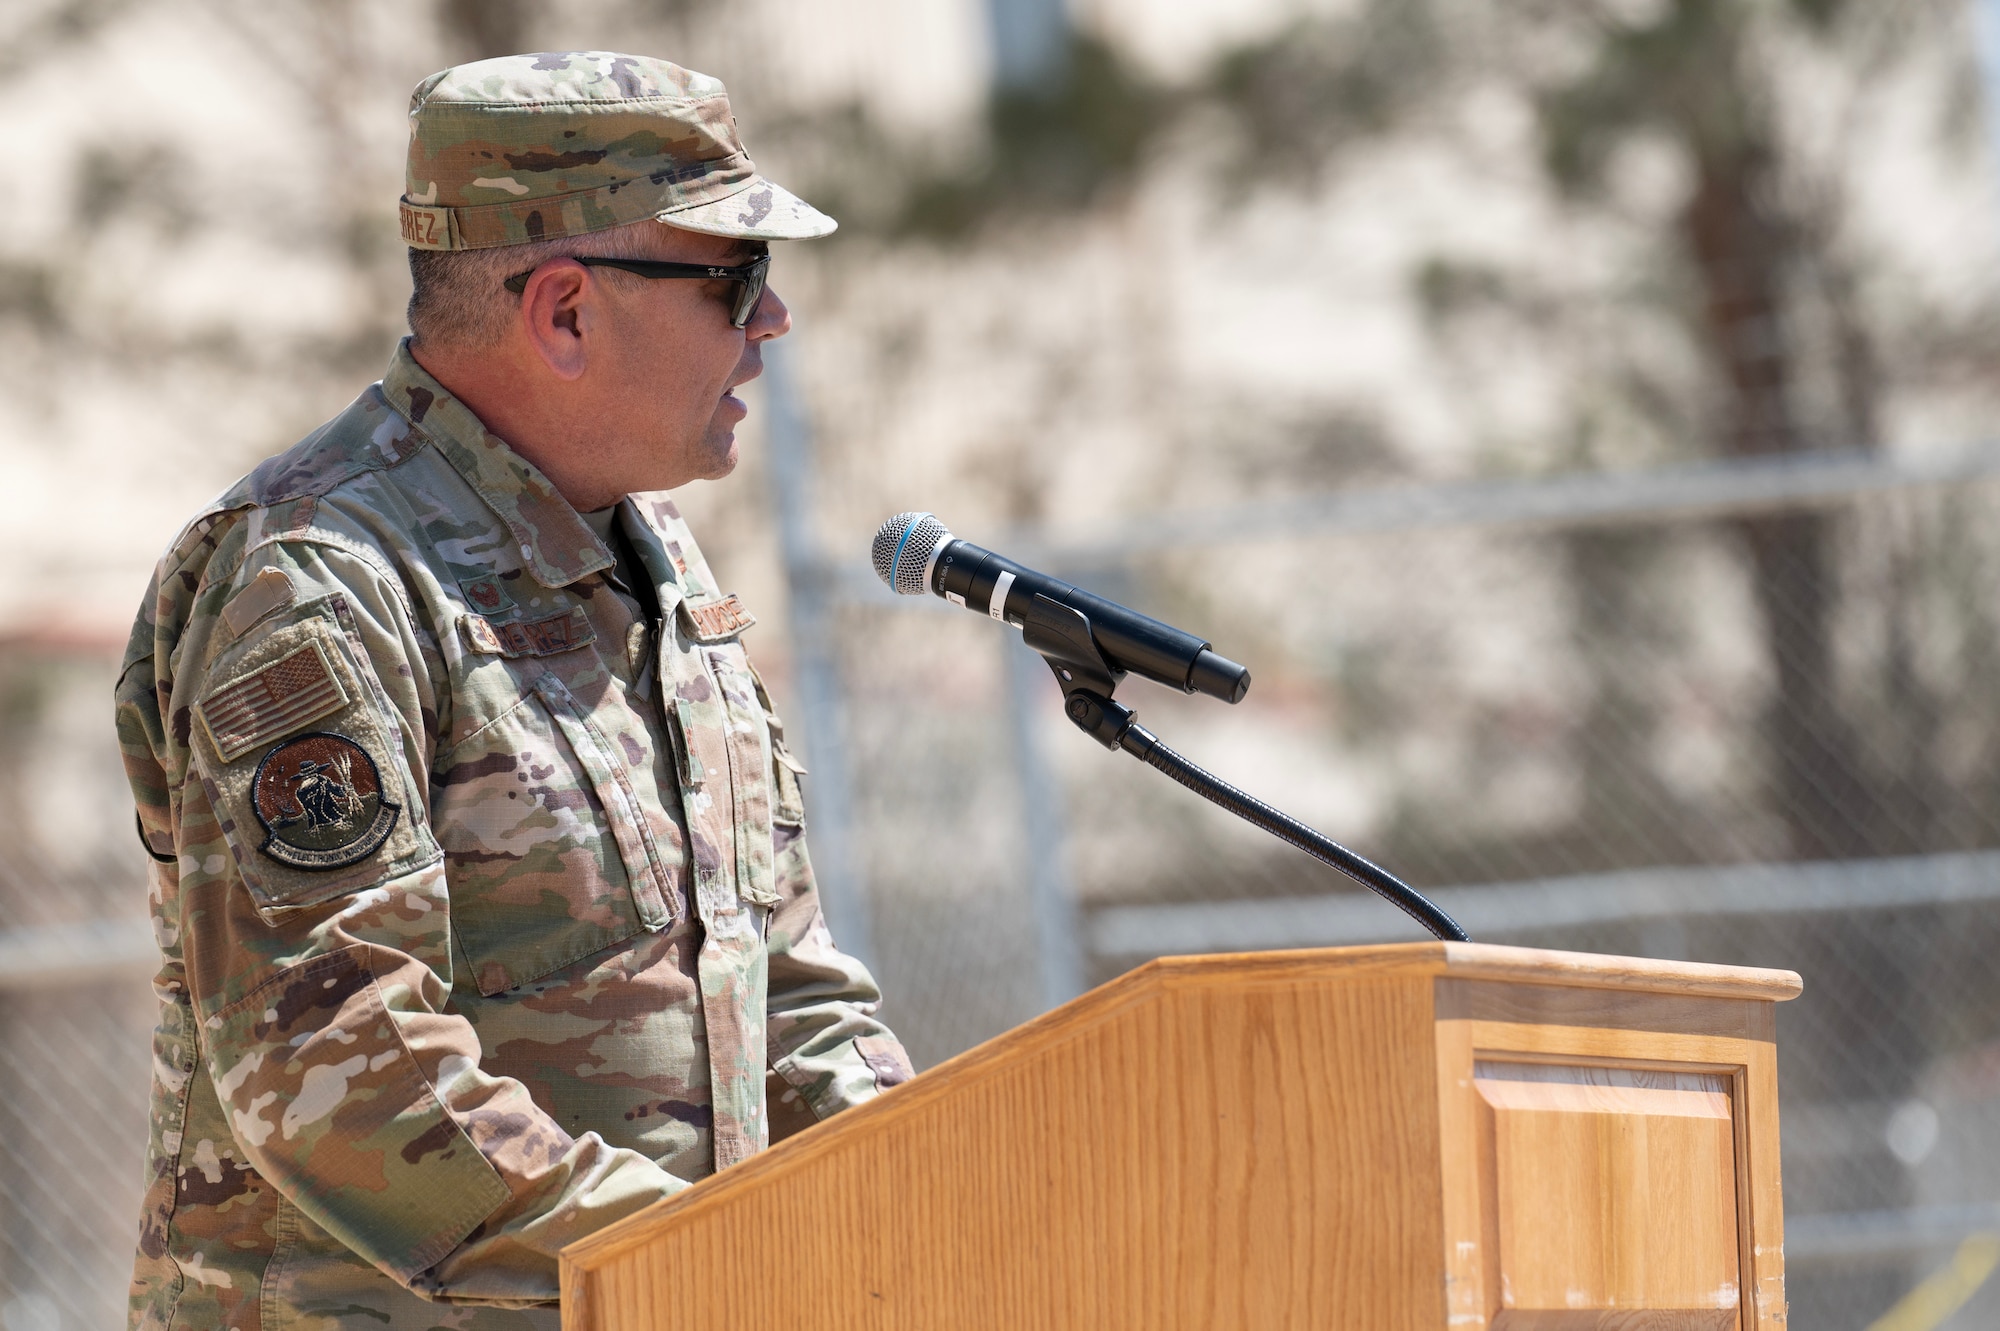 Col. Jose Gutierrez, 412th Electronic Warfare Group commander, speaks as the presiding official at the Digital Test and Training Range Facility Ribbon-Cutting Ceremony at Edwards Air Force Base, California, May 8, 2023. The DTTR is specifically designed to meet the unique and complex needs of the Joint Simulation Environment. Equipped with cutting-edge technology, the facility enables Edwards' skilled test professionals to work more effectively and efficiently than ever. (U.S. Air Force Photo/Tech. Sgt. Robert Cloys)